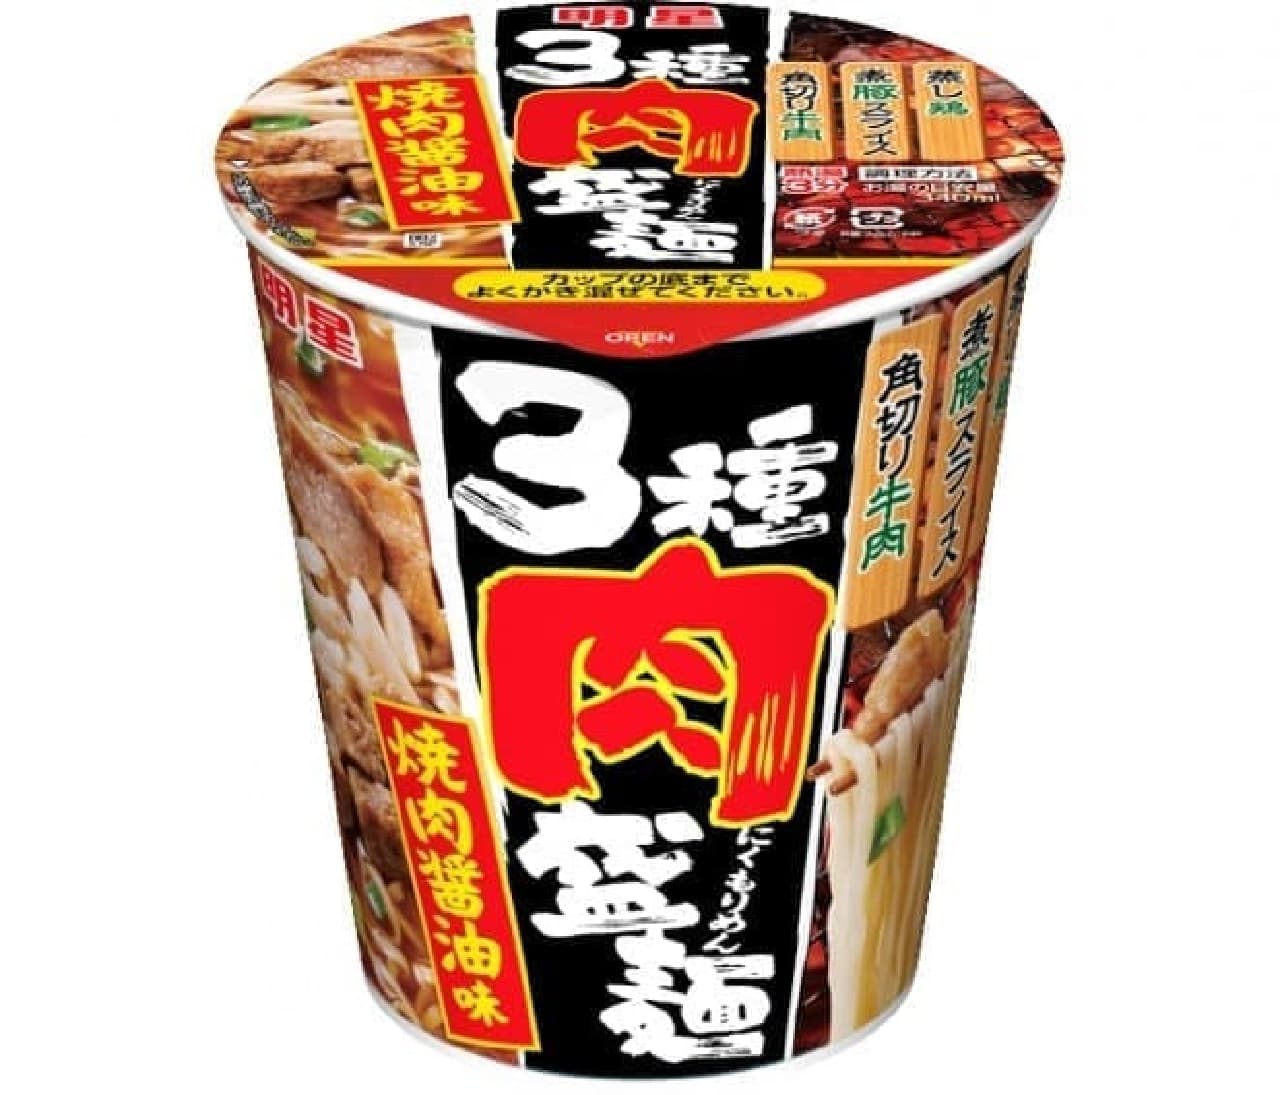 "Three kinds of meat-filled noodles with grilled meat and soy sauce"